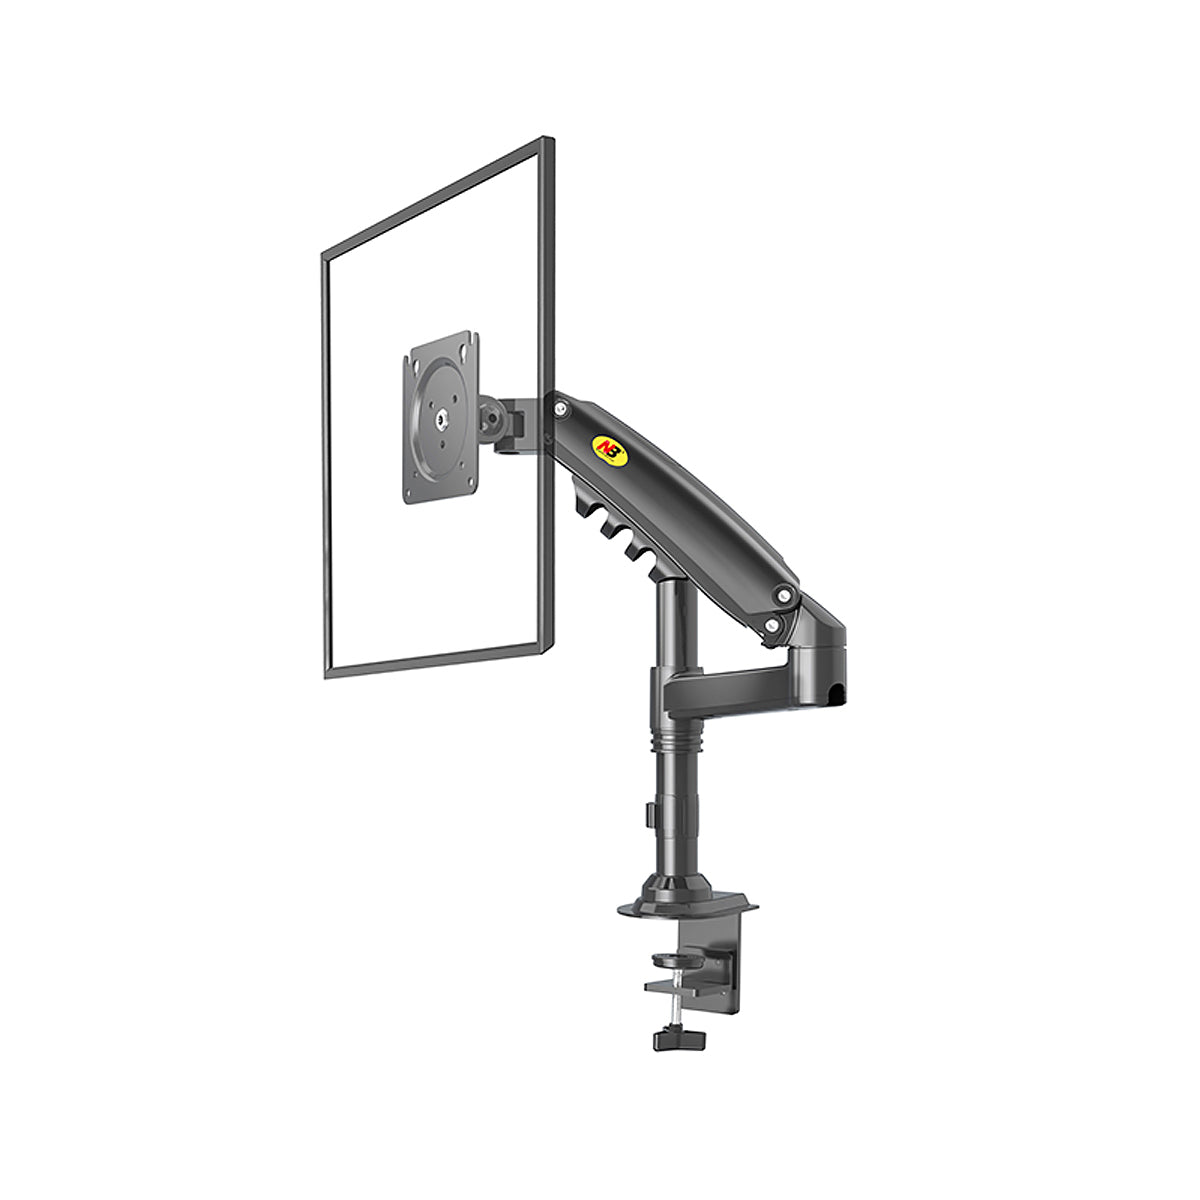 NB North Bayou Monitor Arm Full Motion Swivel Monitor Mount Review 